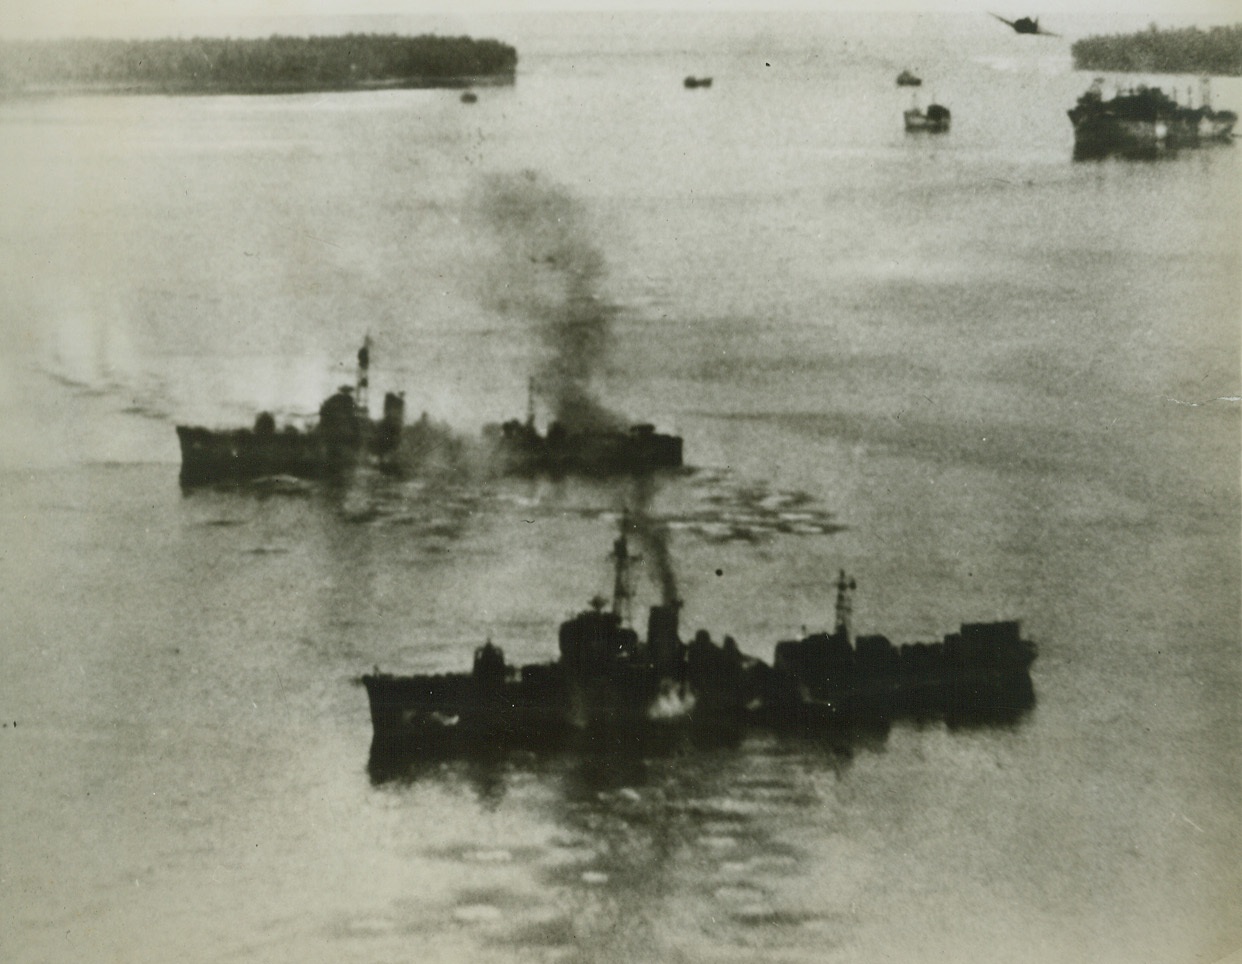 Merry Christmas, Dear Tojo, 4/7/1944. Kavieng, New Ireland – Delivering their Christmas gift to Tojo, Navy planes rained death and destruction on Jap cargo and warships at Kevieng, New Ireland, on Christmas day, 1943.  In the foreground two Jap escort vessels, the equivalent of our own destroyer escorts in size and weight, smoke from the attack.  In the background, a Grumman Hellcat swoops low to strafe a big cargo ship. Credit line (Official U.S. Navy photo from ACME);